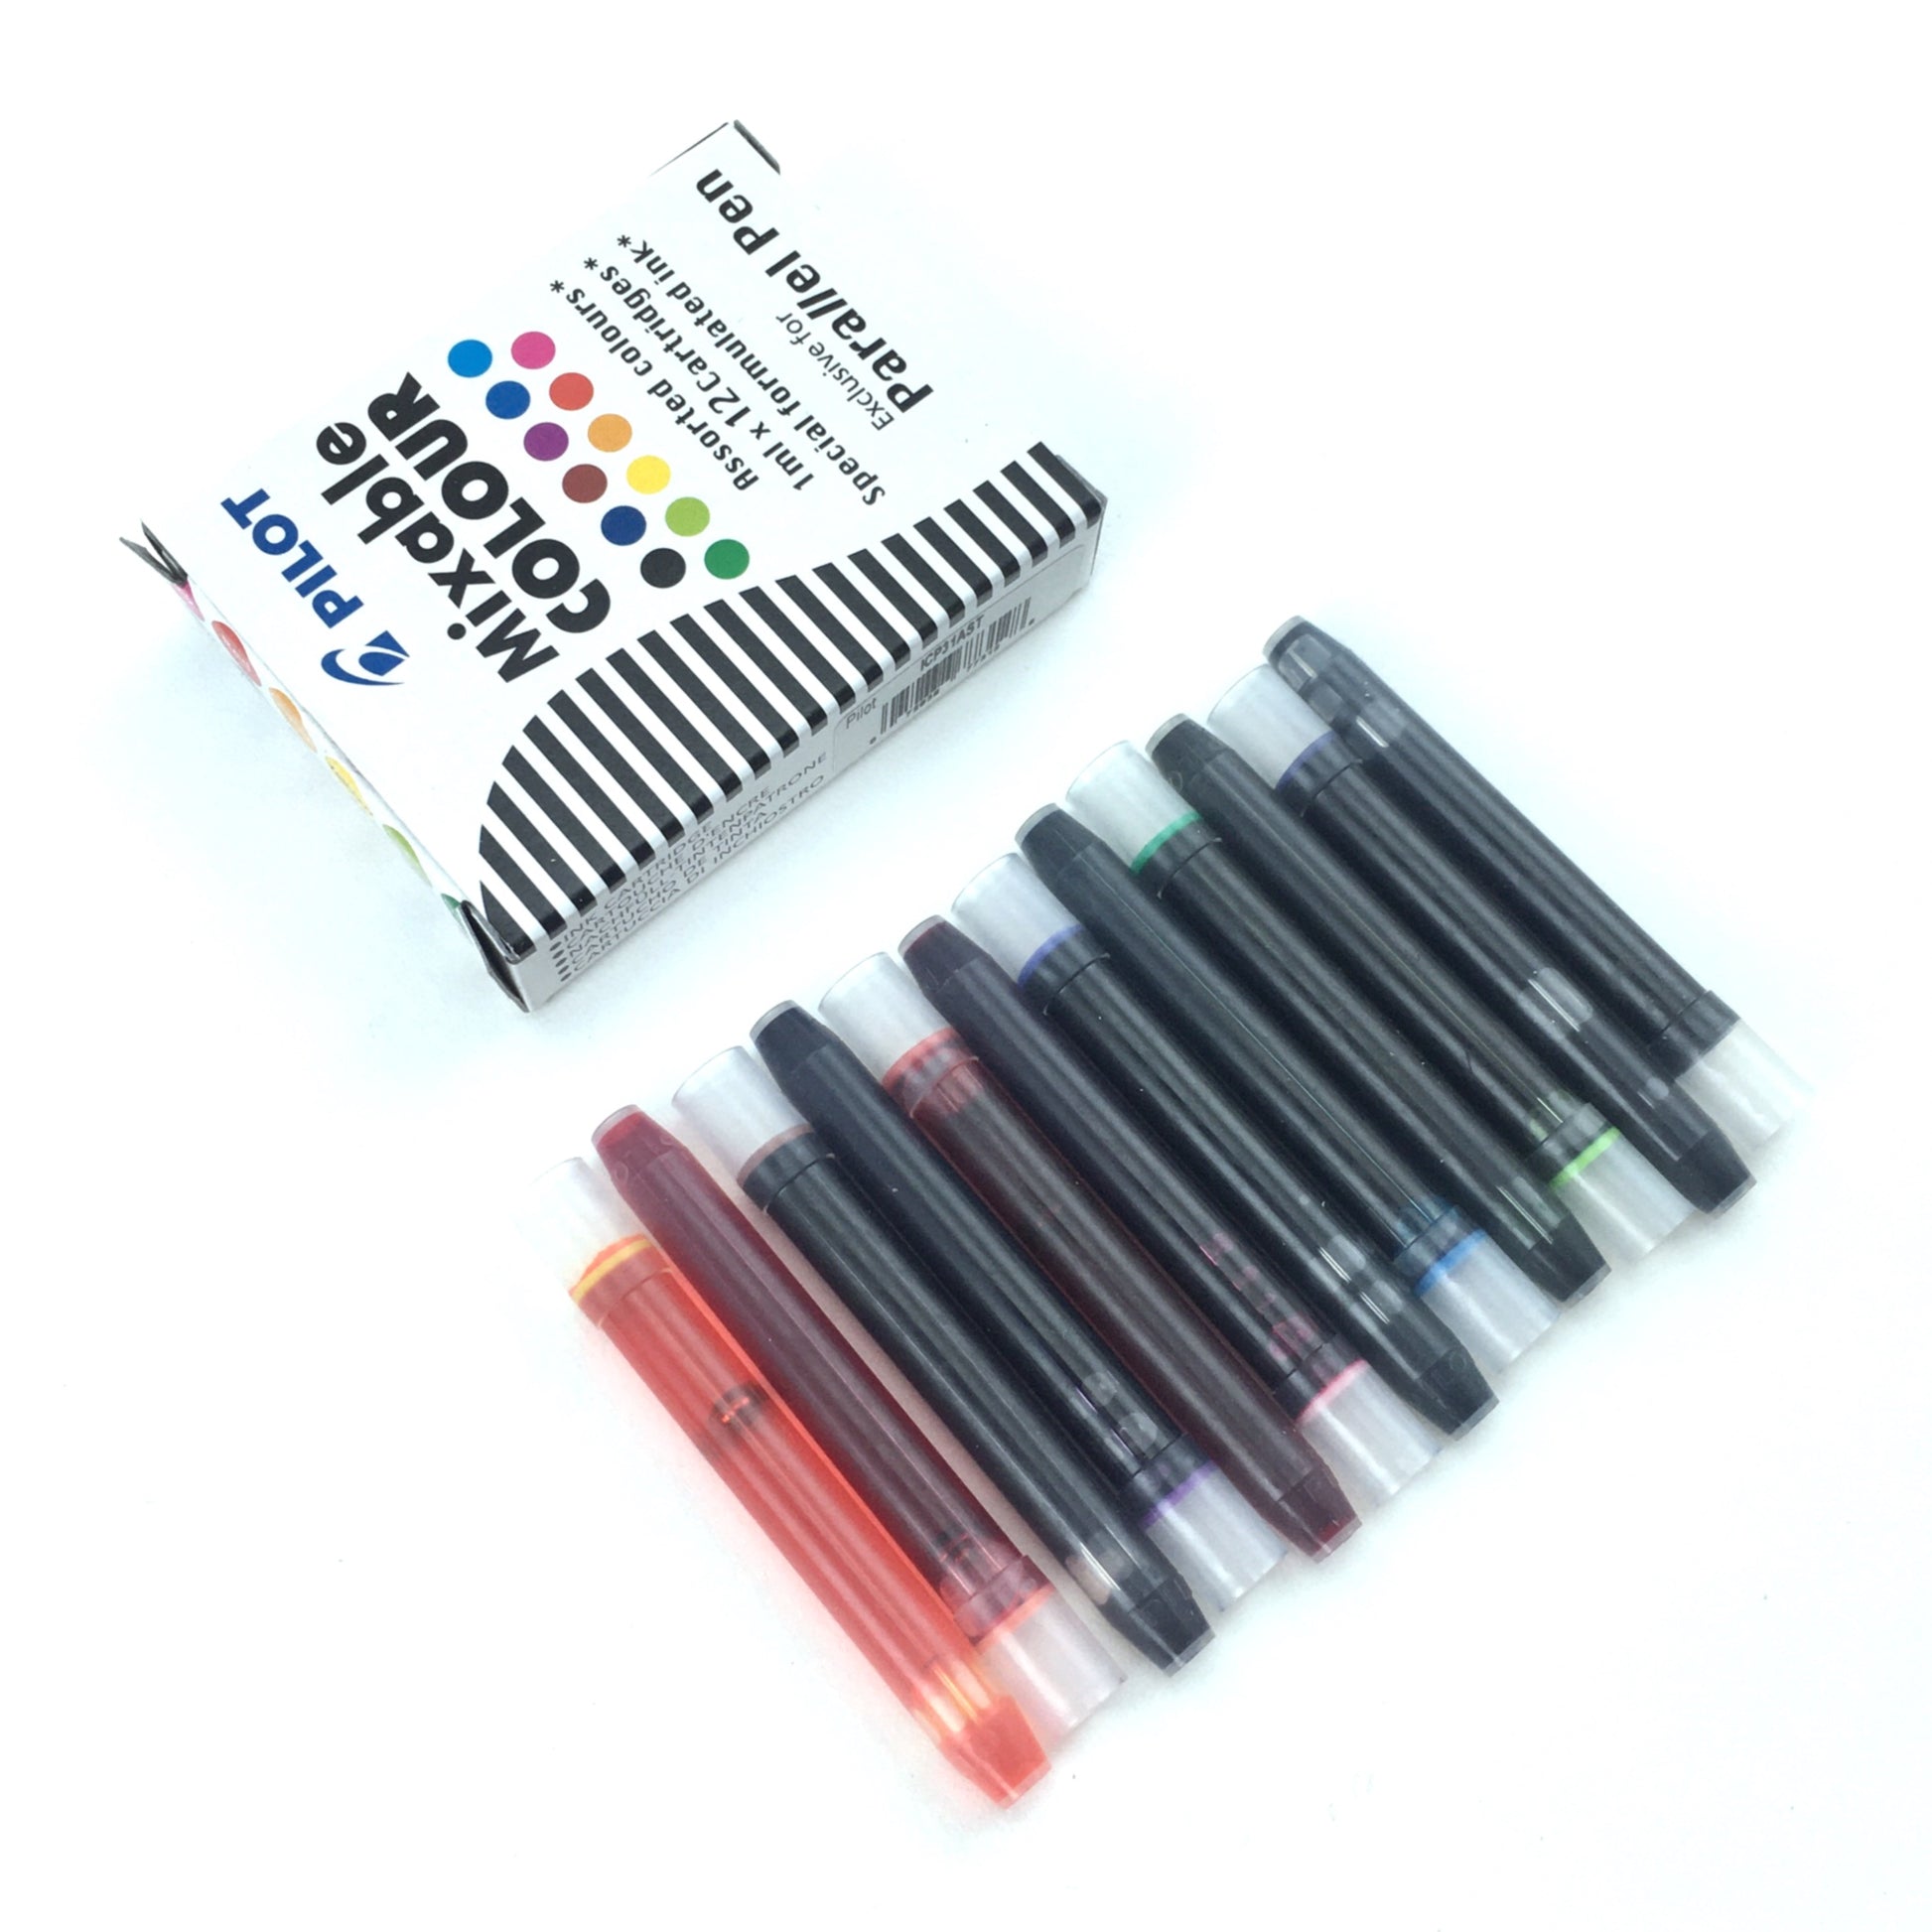  Pilot Parallel Mixable Color Ink Refills for